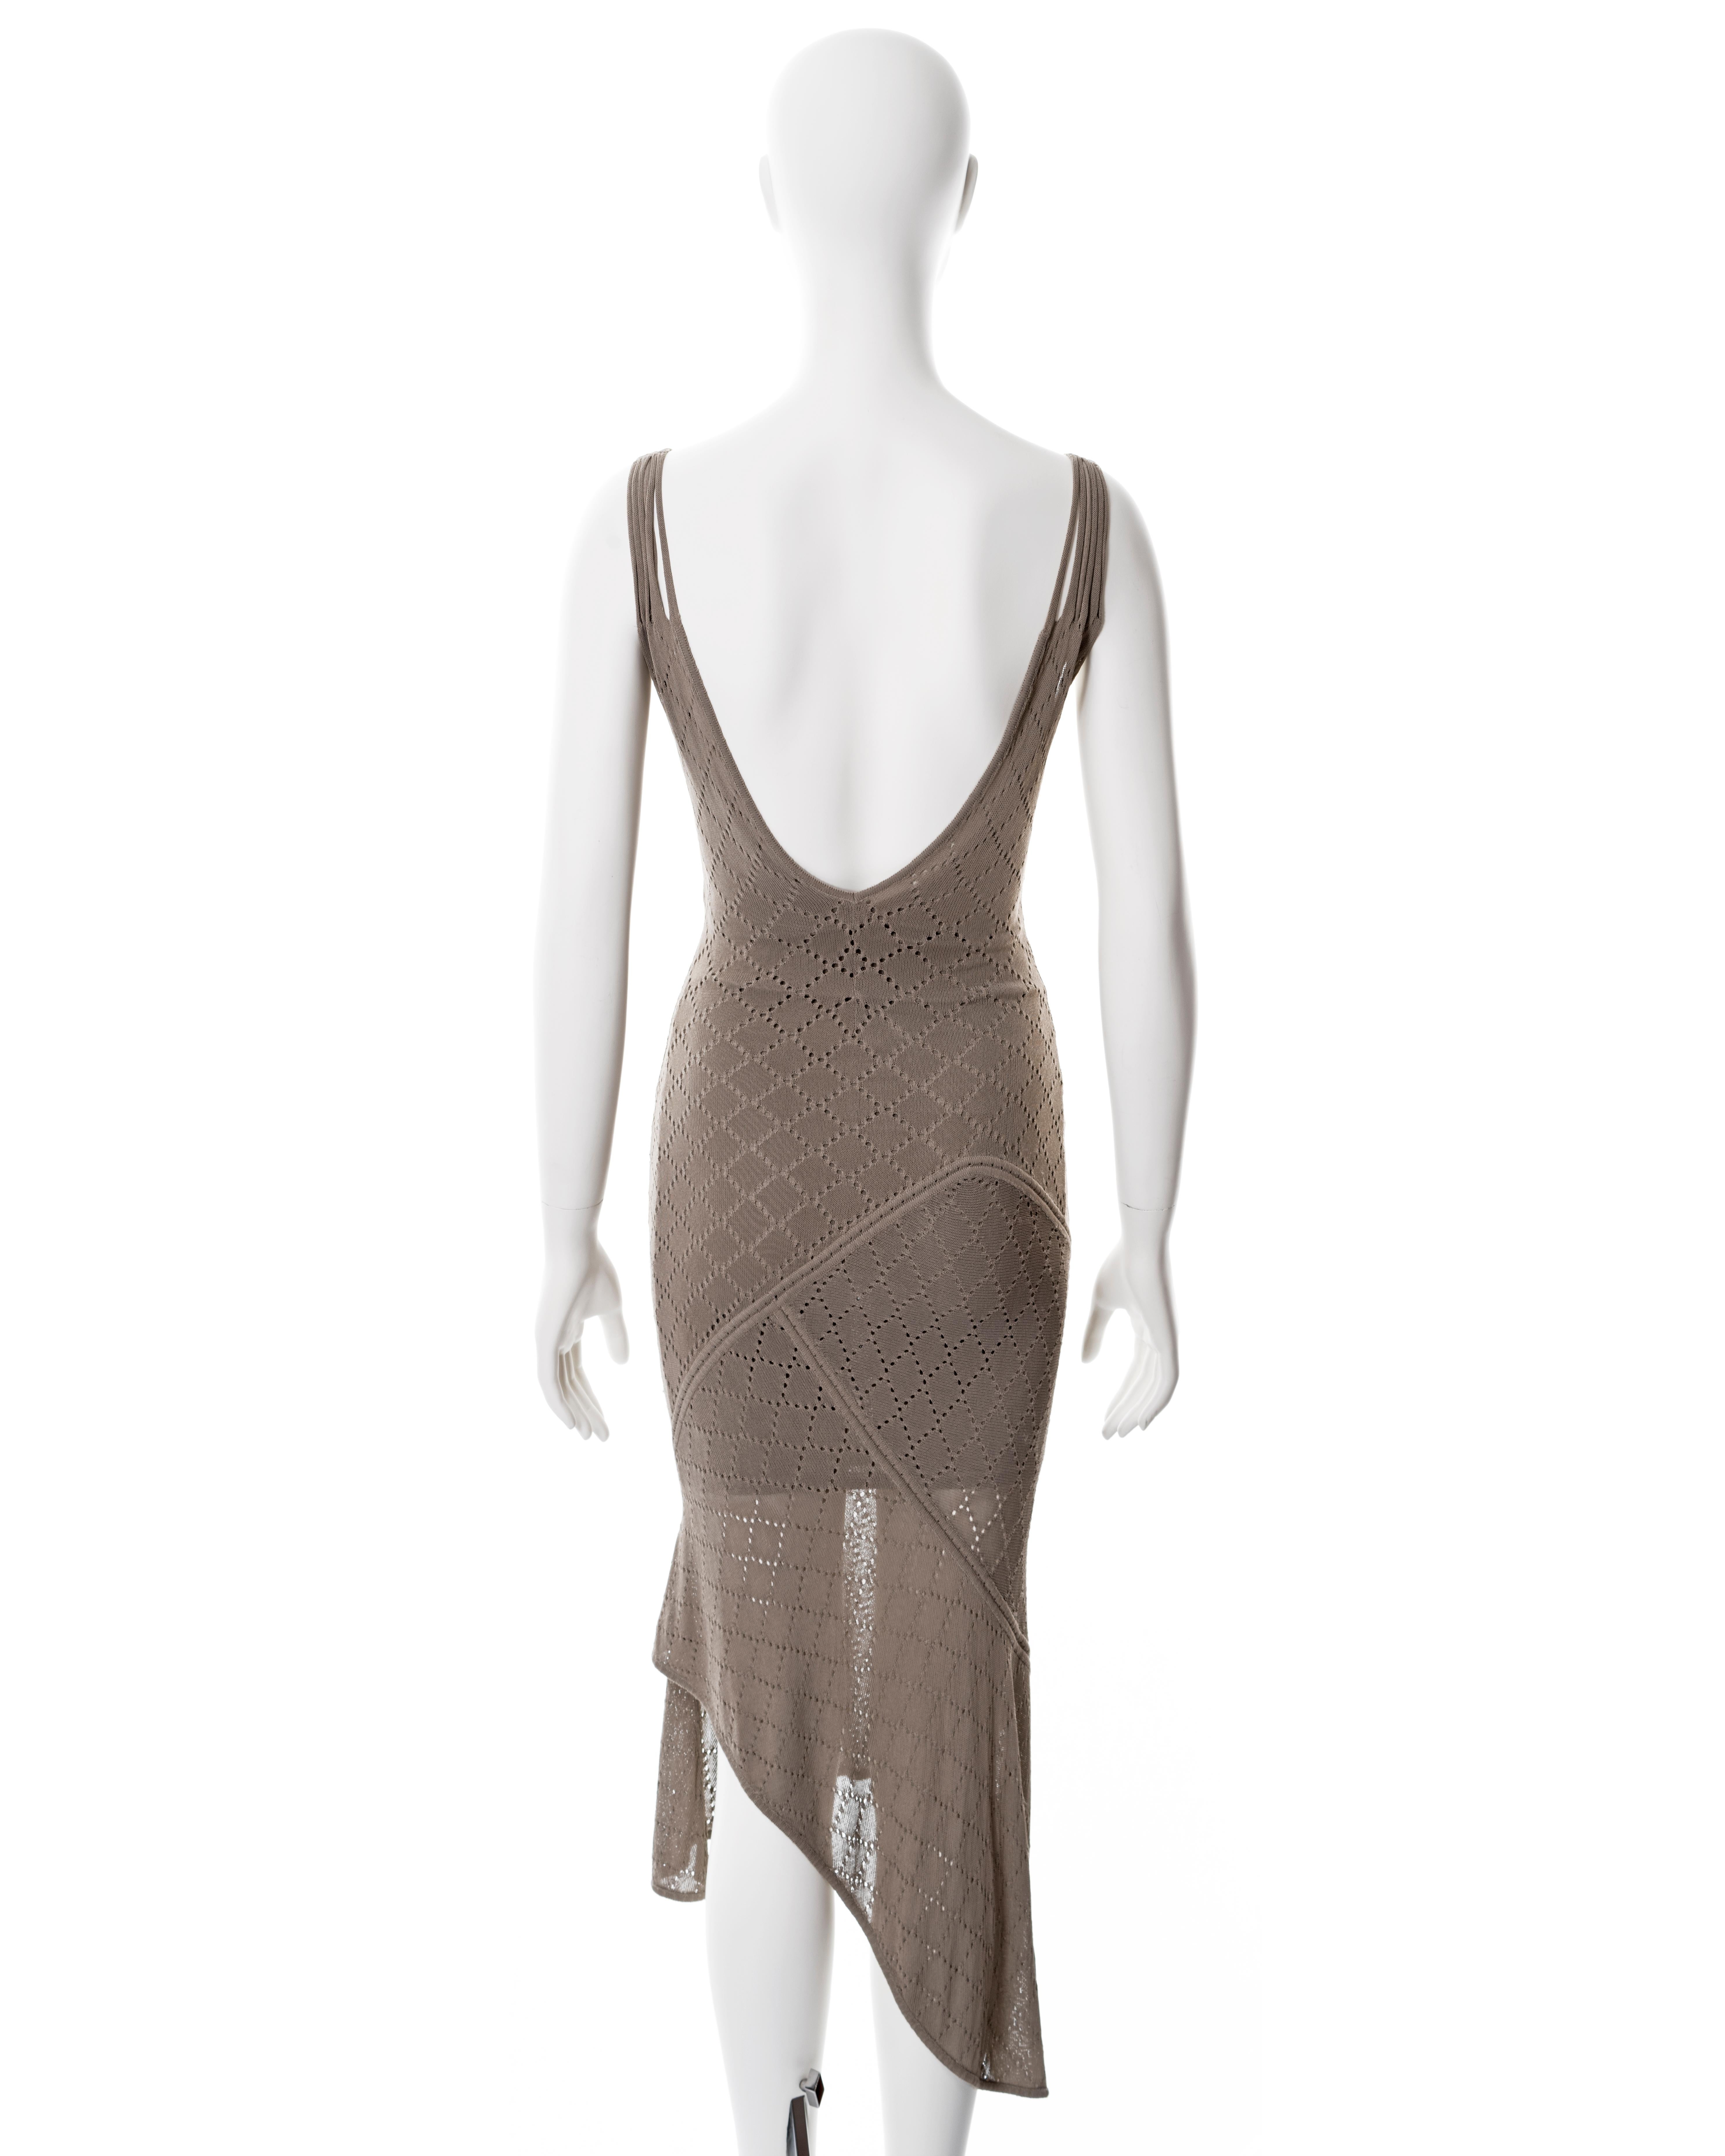 Christian Dior by John Galliano taupe open-knit dress, ss 2001 For Sale 5